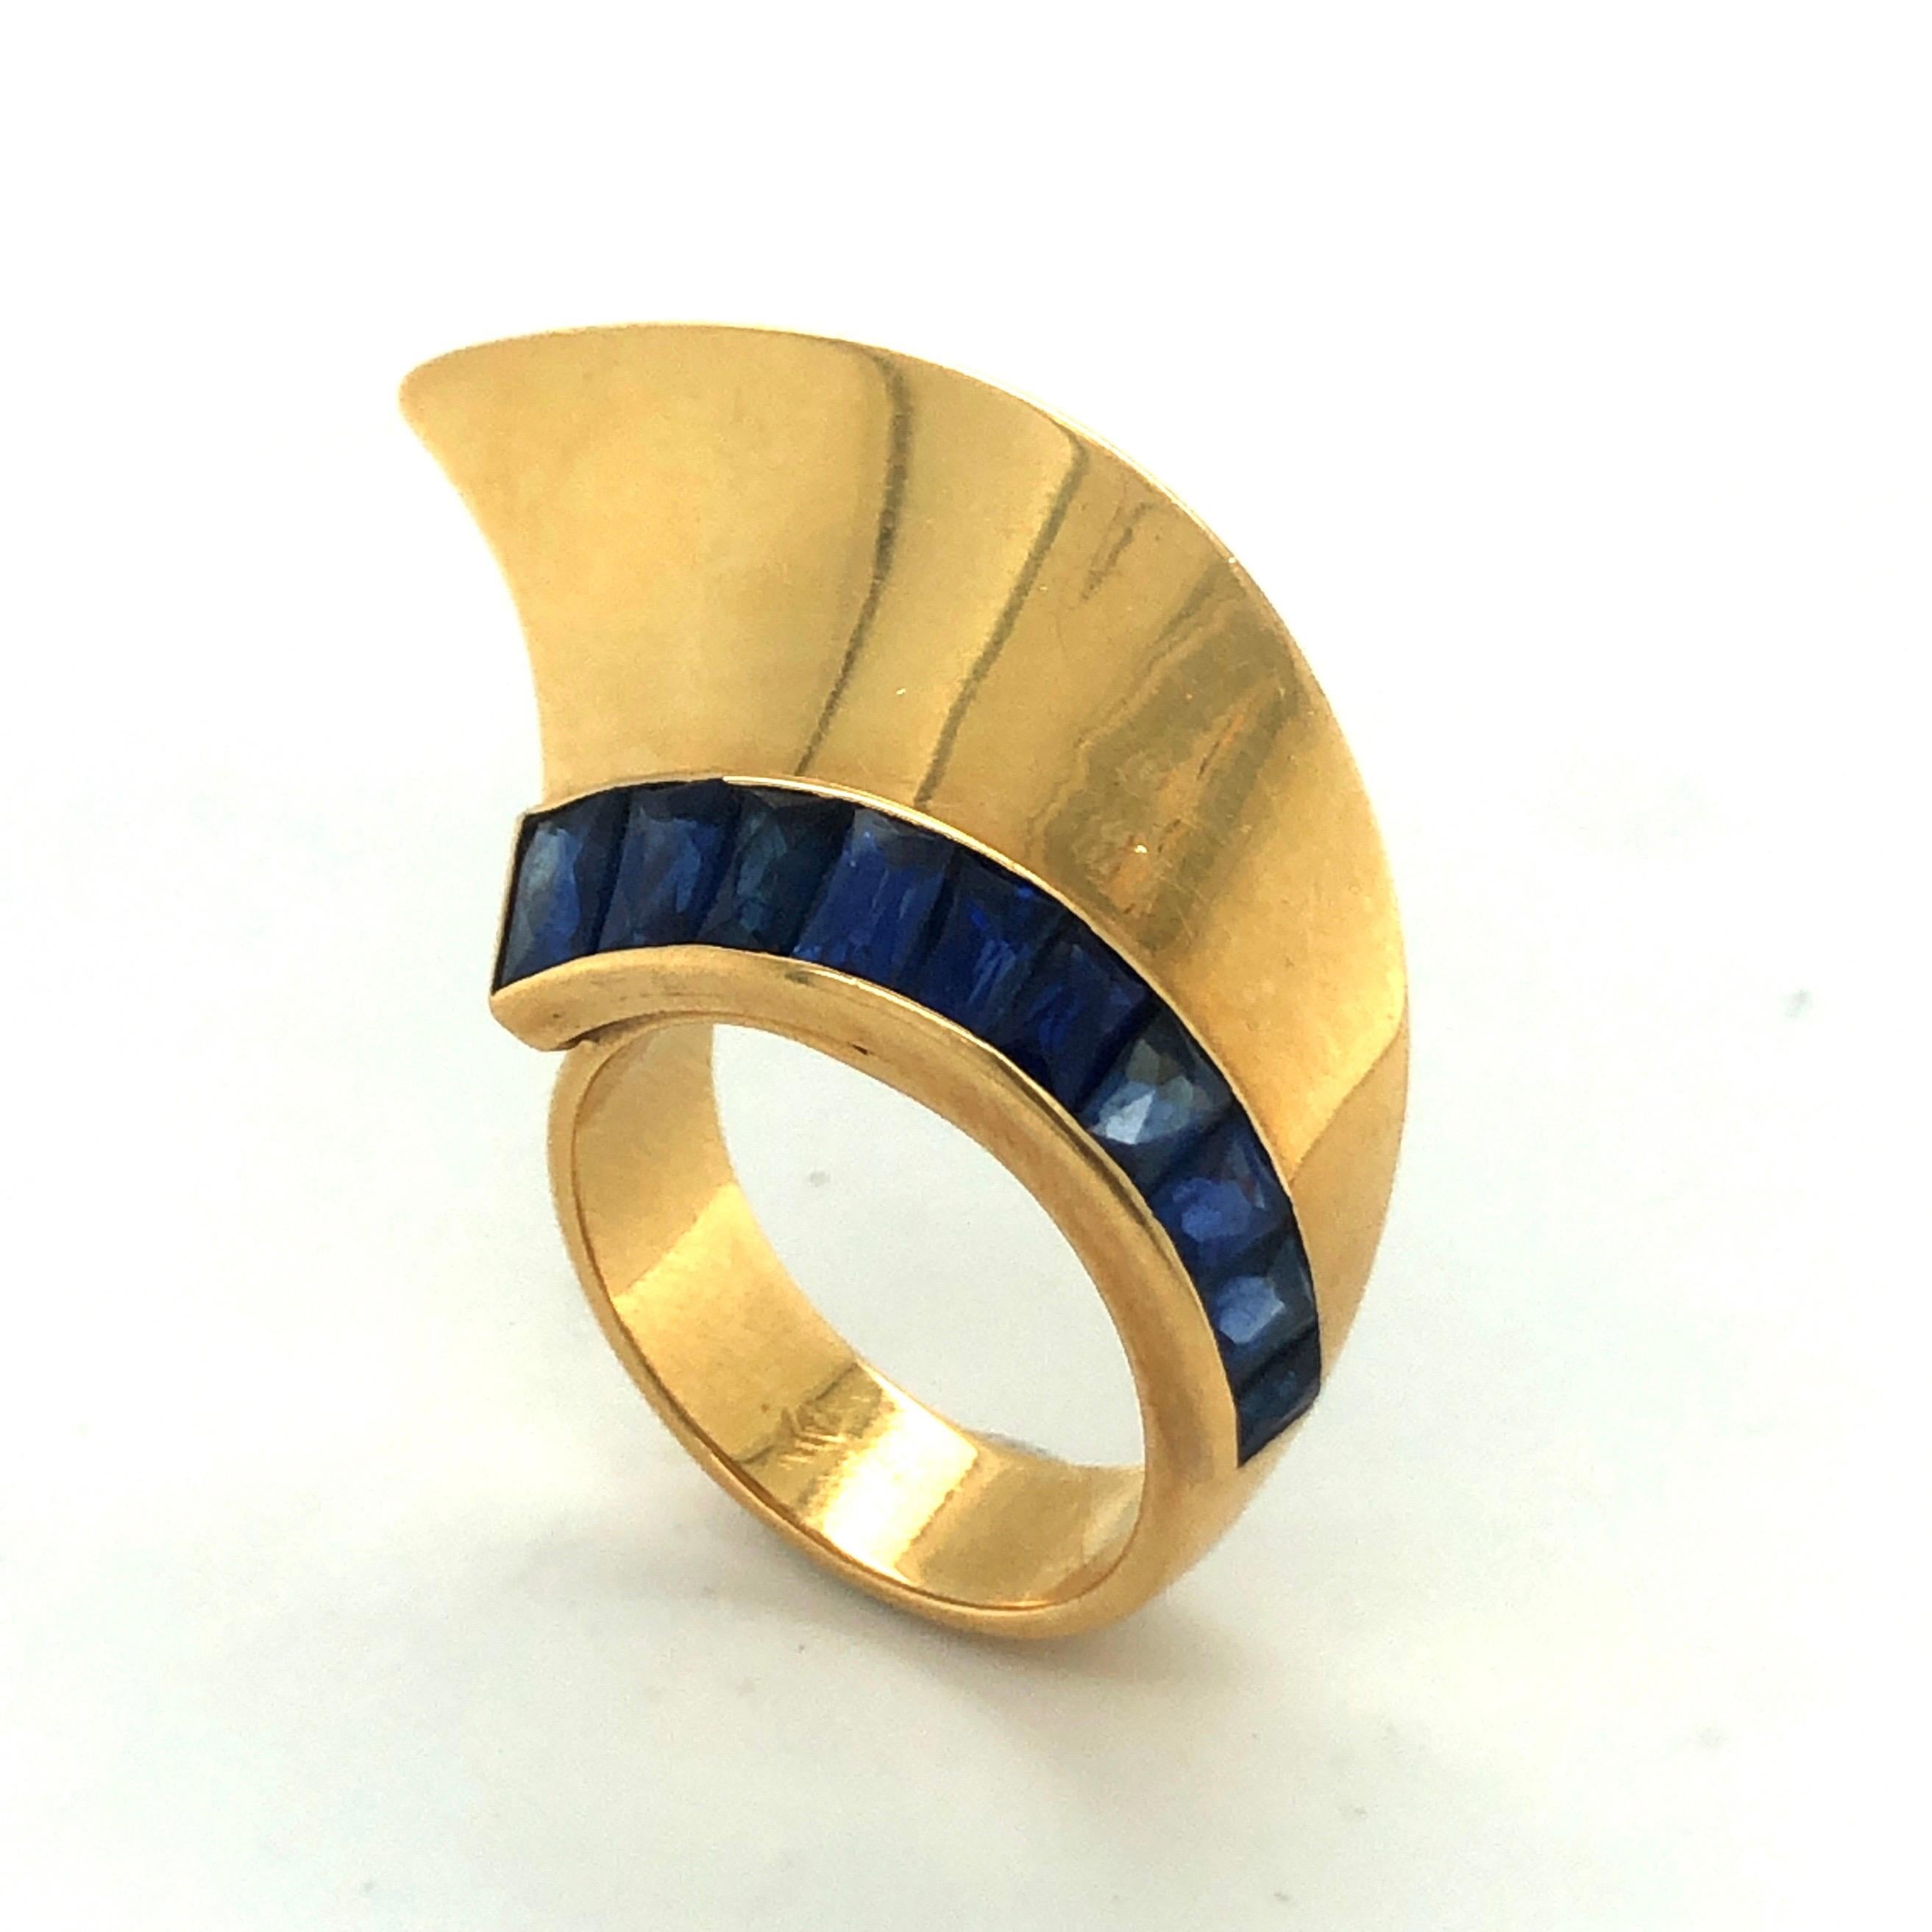 Whimsical 18 Karat Yellow Gold and Sapphire French Retro Ring, 1940s.
Asymmetrical retro ring set with a line of 10 natural French cut blue sapphires totalling about 3 carats. It is suitable for day and night wear and will add a special twist to